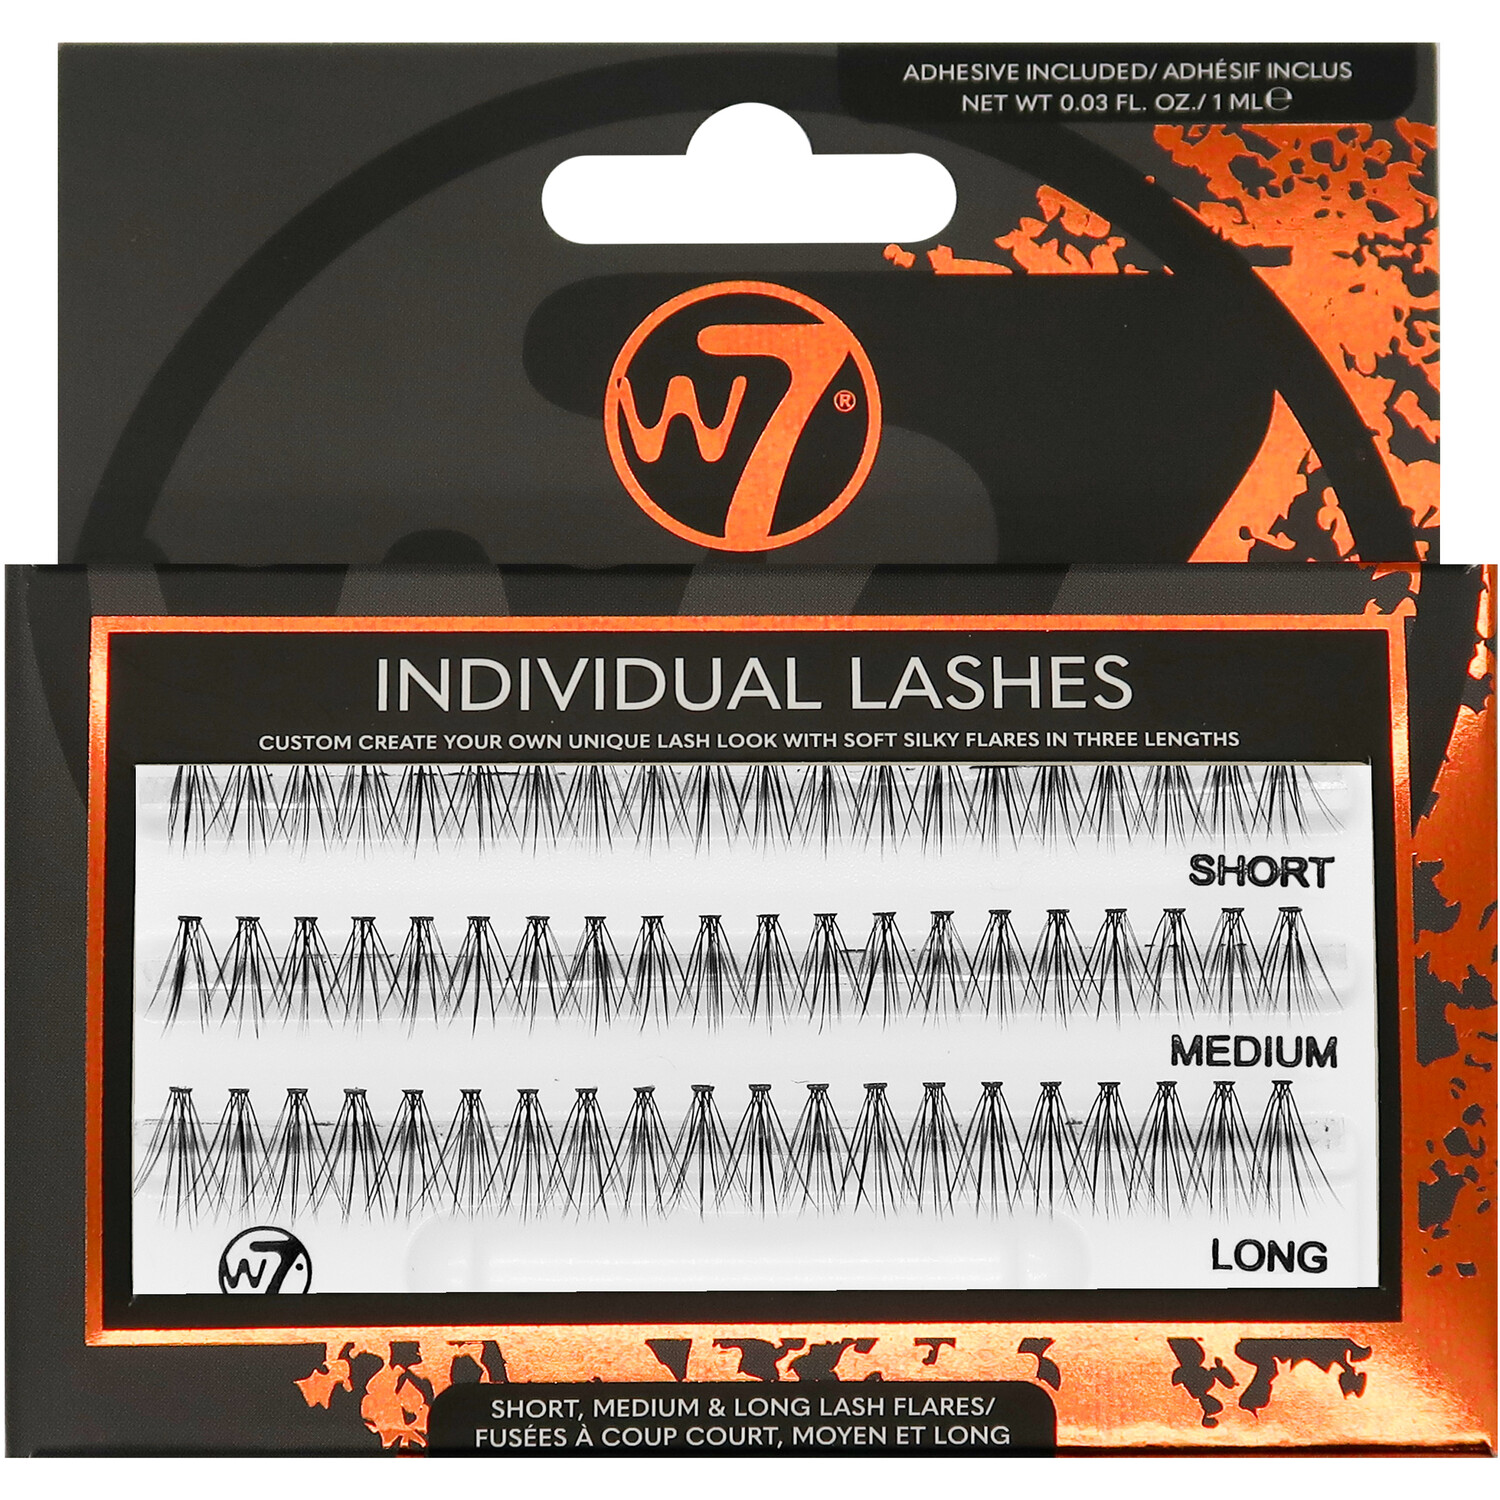 Single W7 Individual Lashes in Assorted sizes Image 1